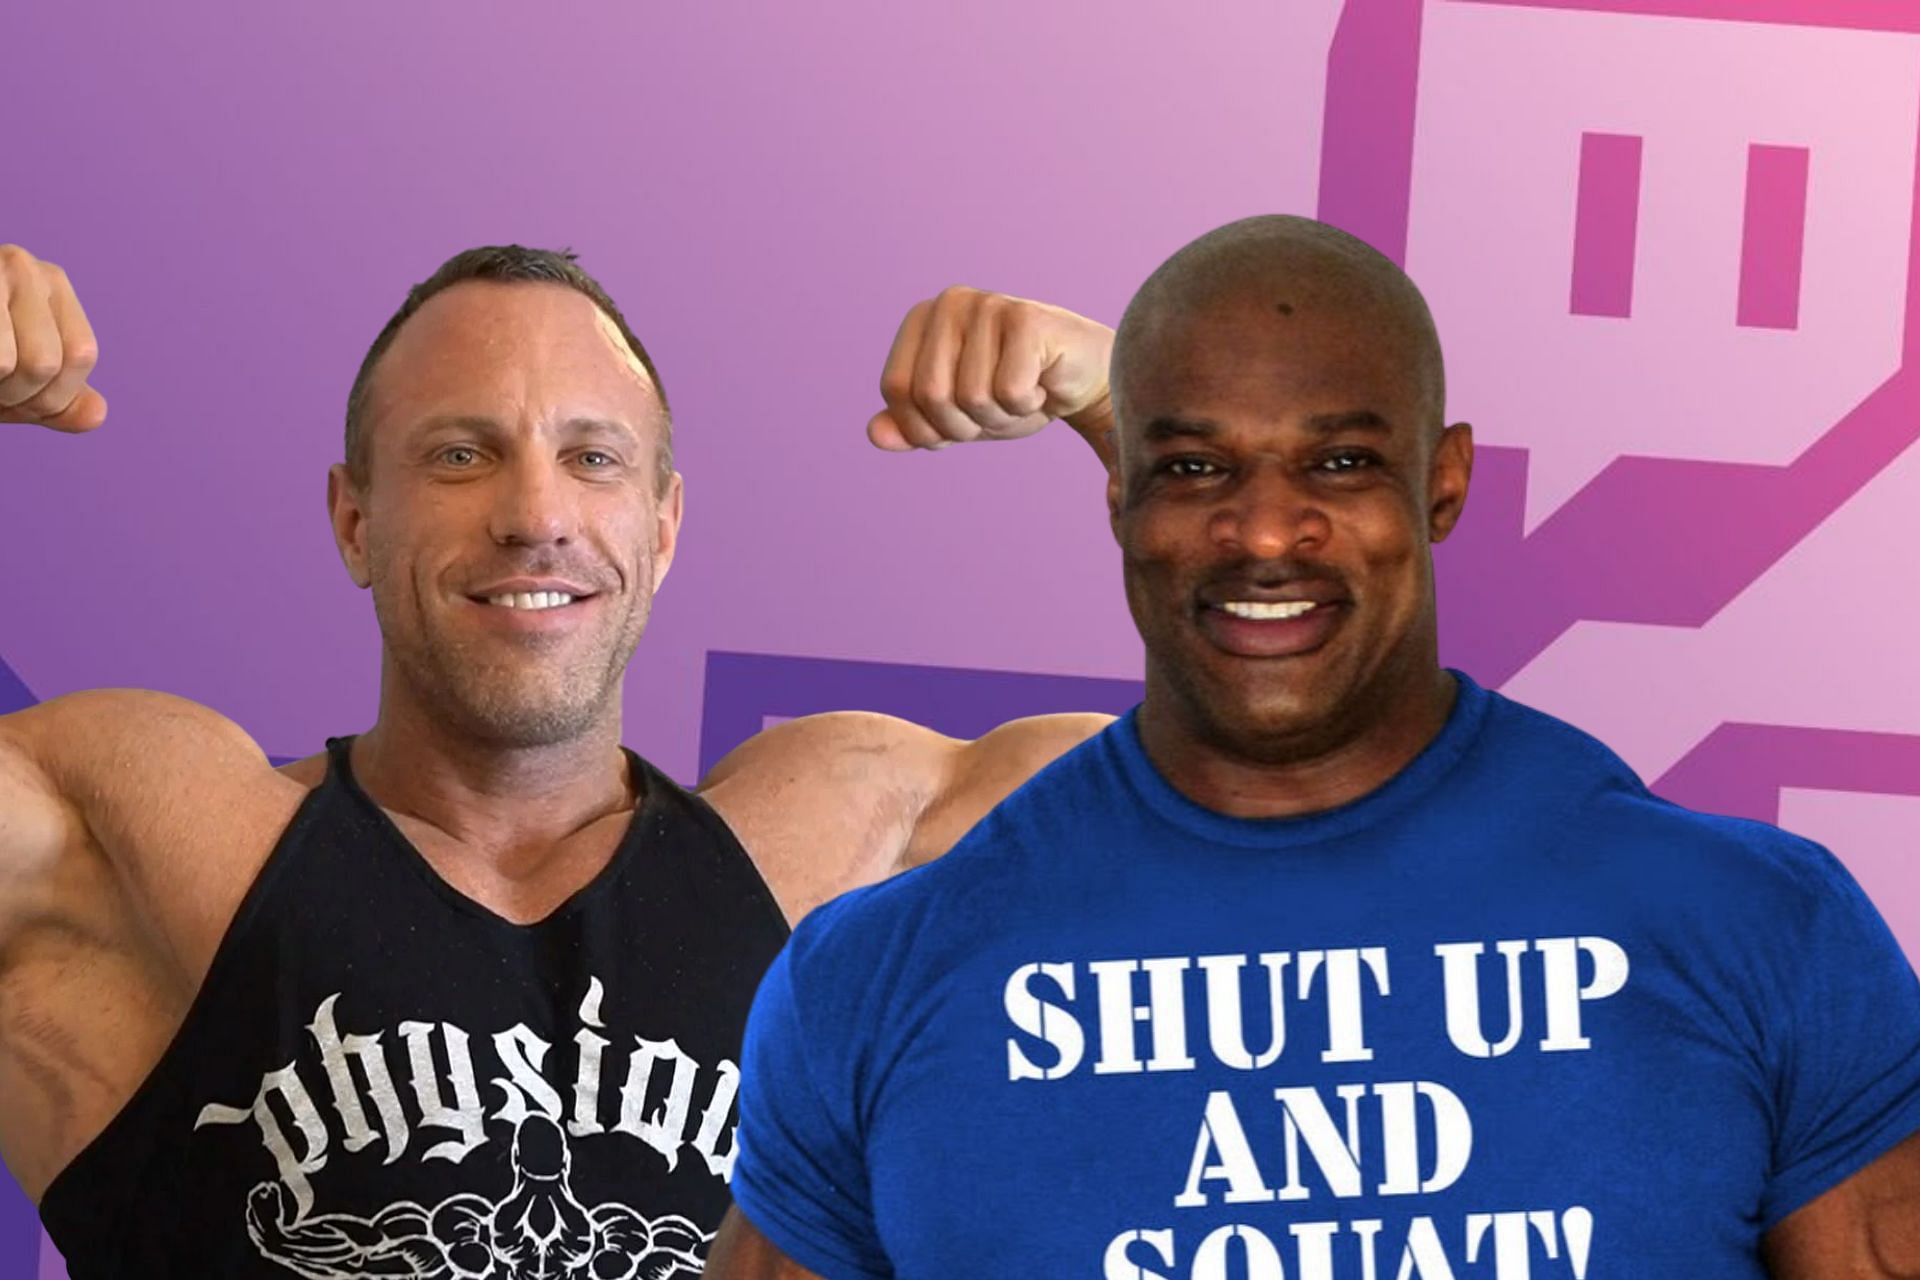 Ronnie Coleman has an inspirational message for Camp Knut participants (Image via Sportskeeda)